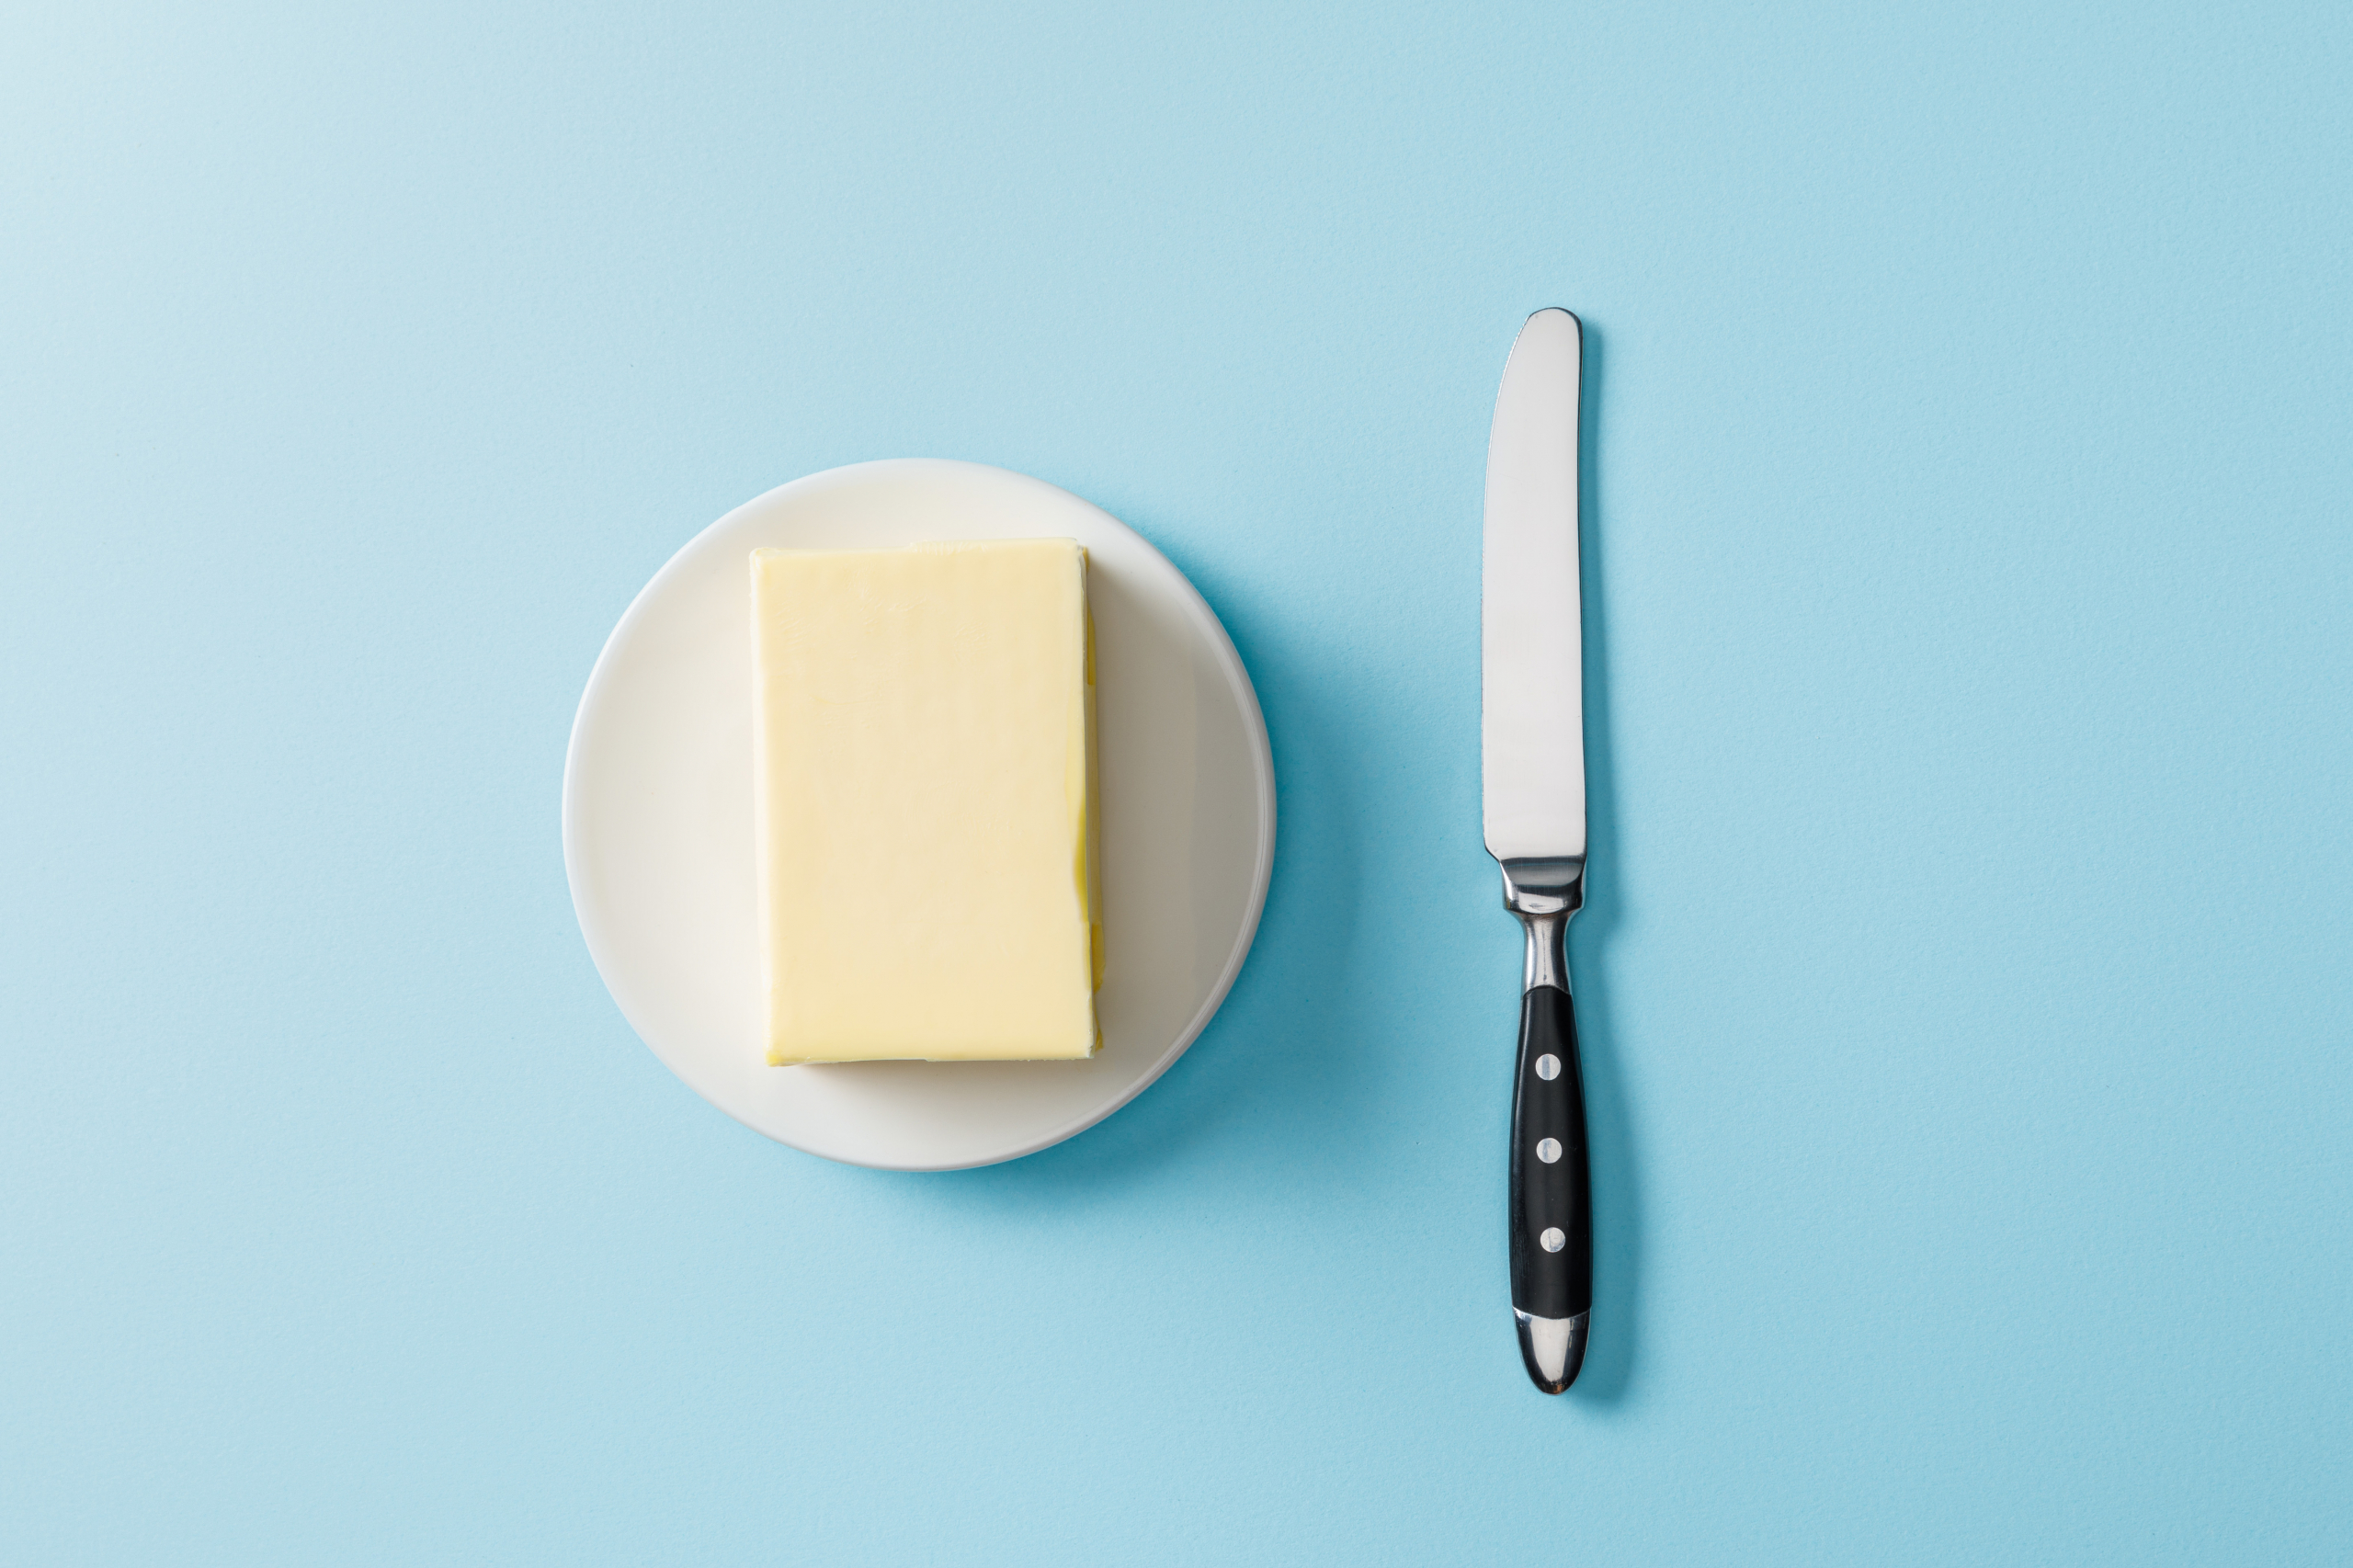 Is Butter Bad for You, or Good?